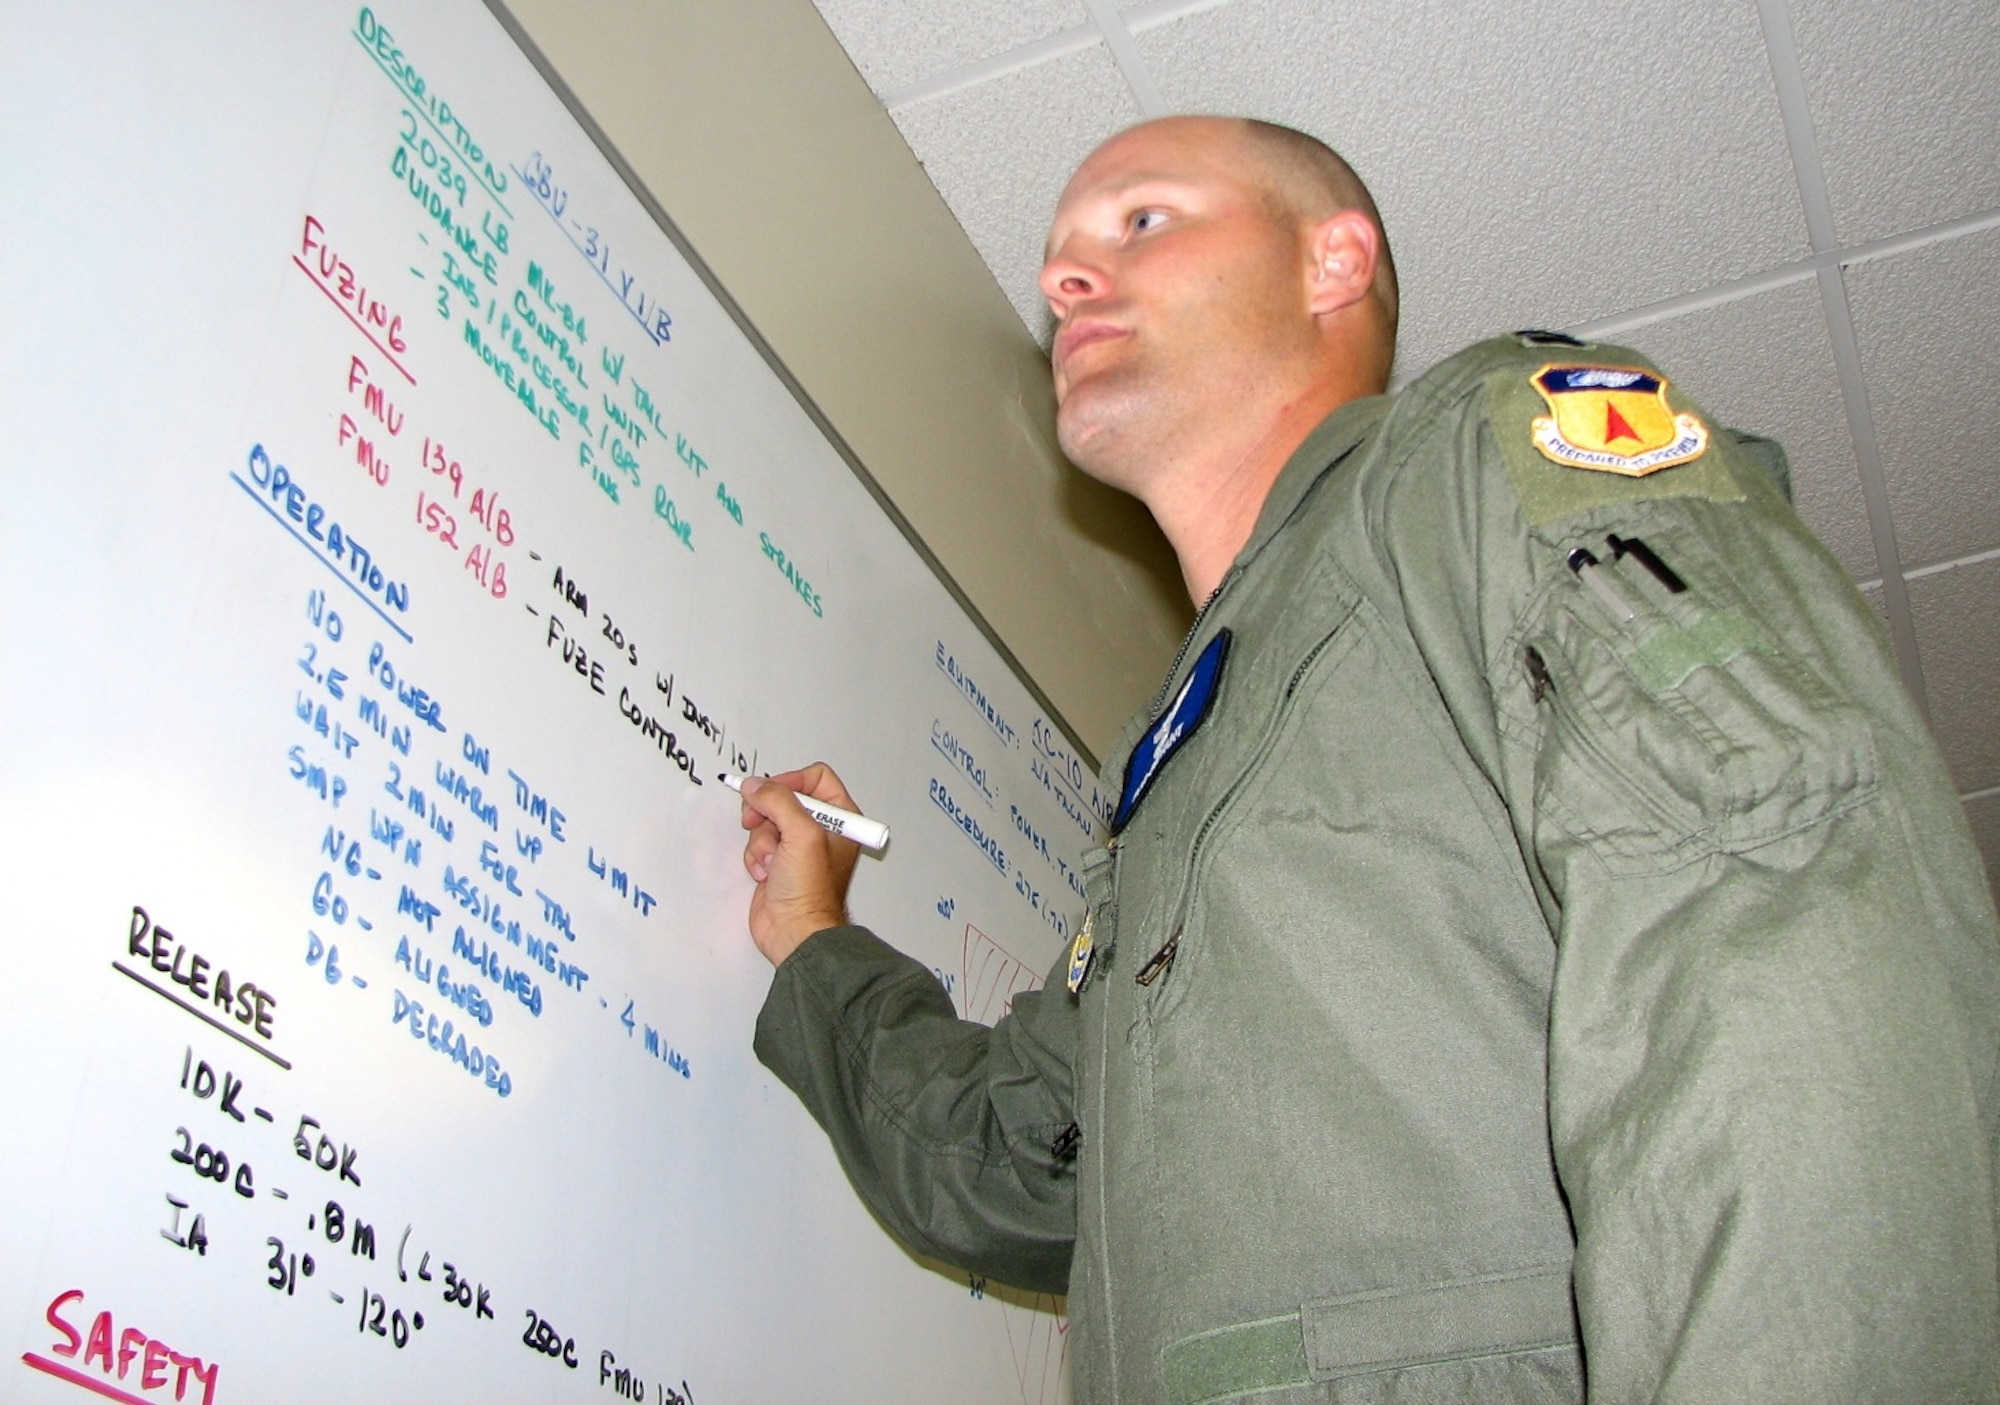 ANDERSEN AIR FORCE BASE, Guam – ‘Mission Planning’ – Captain Bob Bryant, 13th Expeditionary Bomb Squadron B-2 Spirit pilot, adds notes to a mission planning – or “grease” – board in the bomber operations center at Andersen Air Force Base, Guam, July 10. The captain is one of approximately 35 Airmen, from the 13th Bomb Squadron and the 509th Operations Support Staff, Whiteman AFB, Mo., who arrived here June 29-30 for a two-month deployment. The deployment of B-2 aircraft and personnel to Andersen AFB is to provide the U.S. Pacific Command commander a continuous bomber presence in the Asia-Pacific region. (USAF Photo by Tech. Sgt. Mikal Canfield)